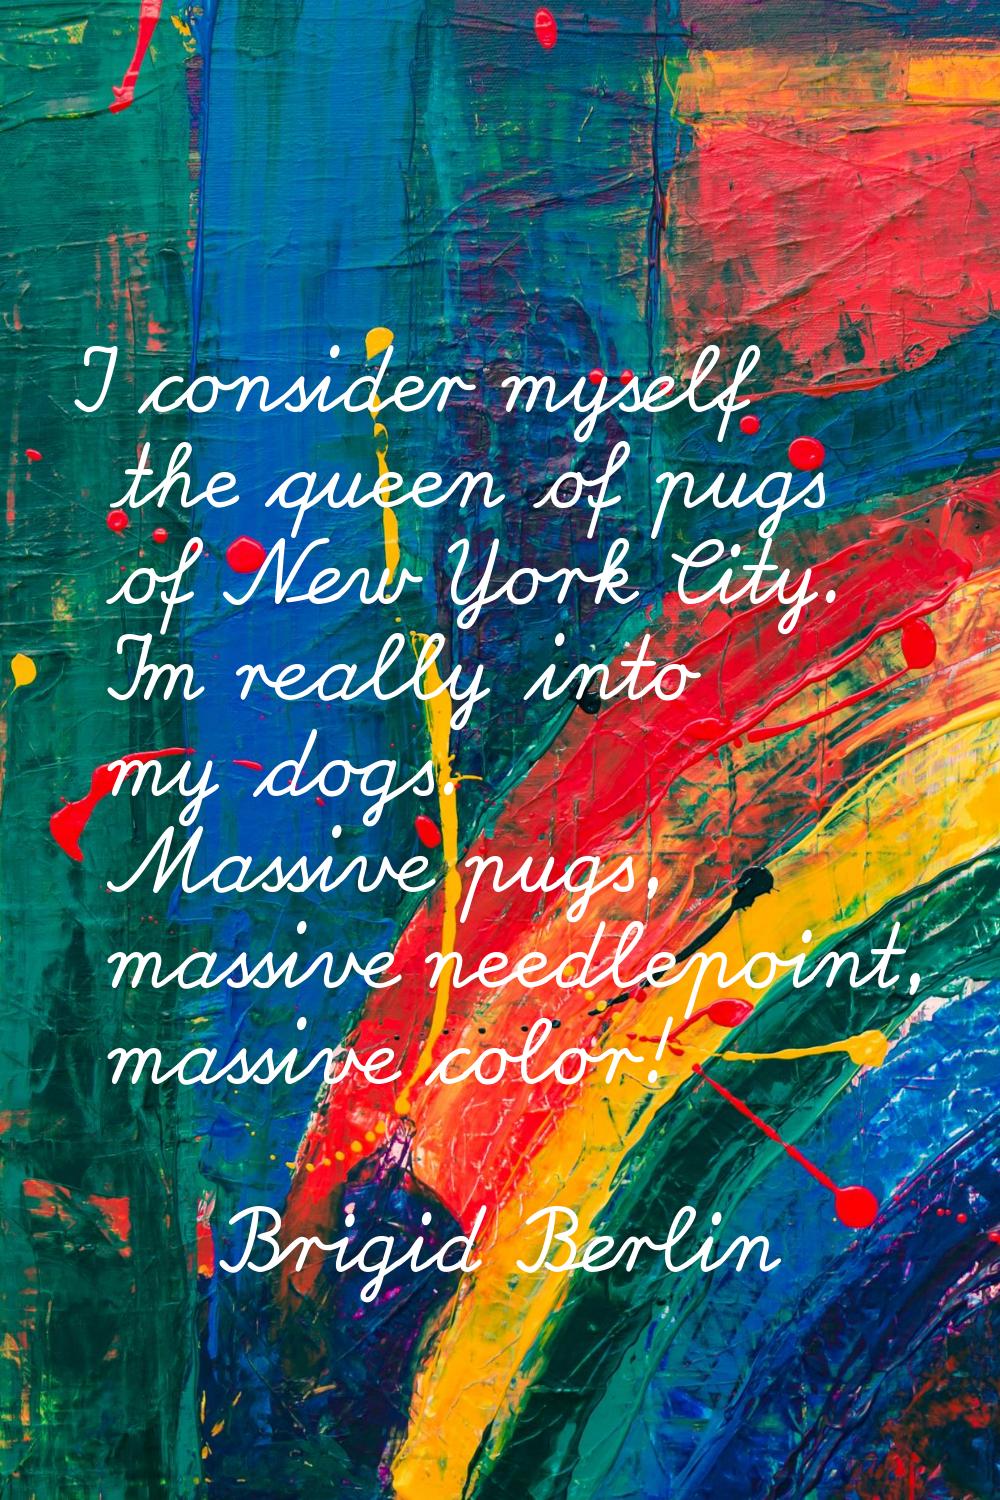 I consider myself the queen of pugs of New York City. I'm really into my dogs. Massive pugs, massiv